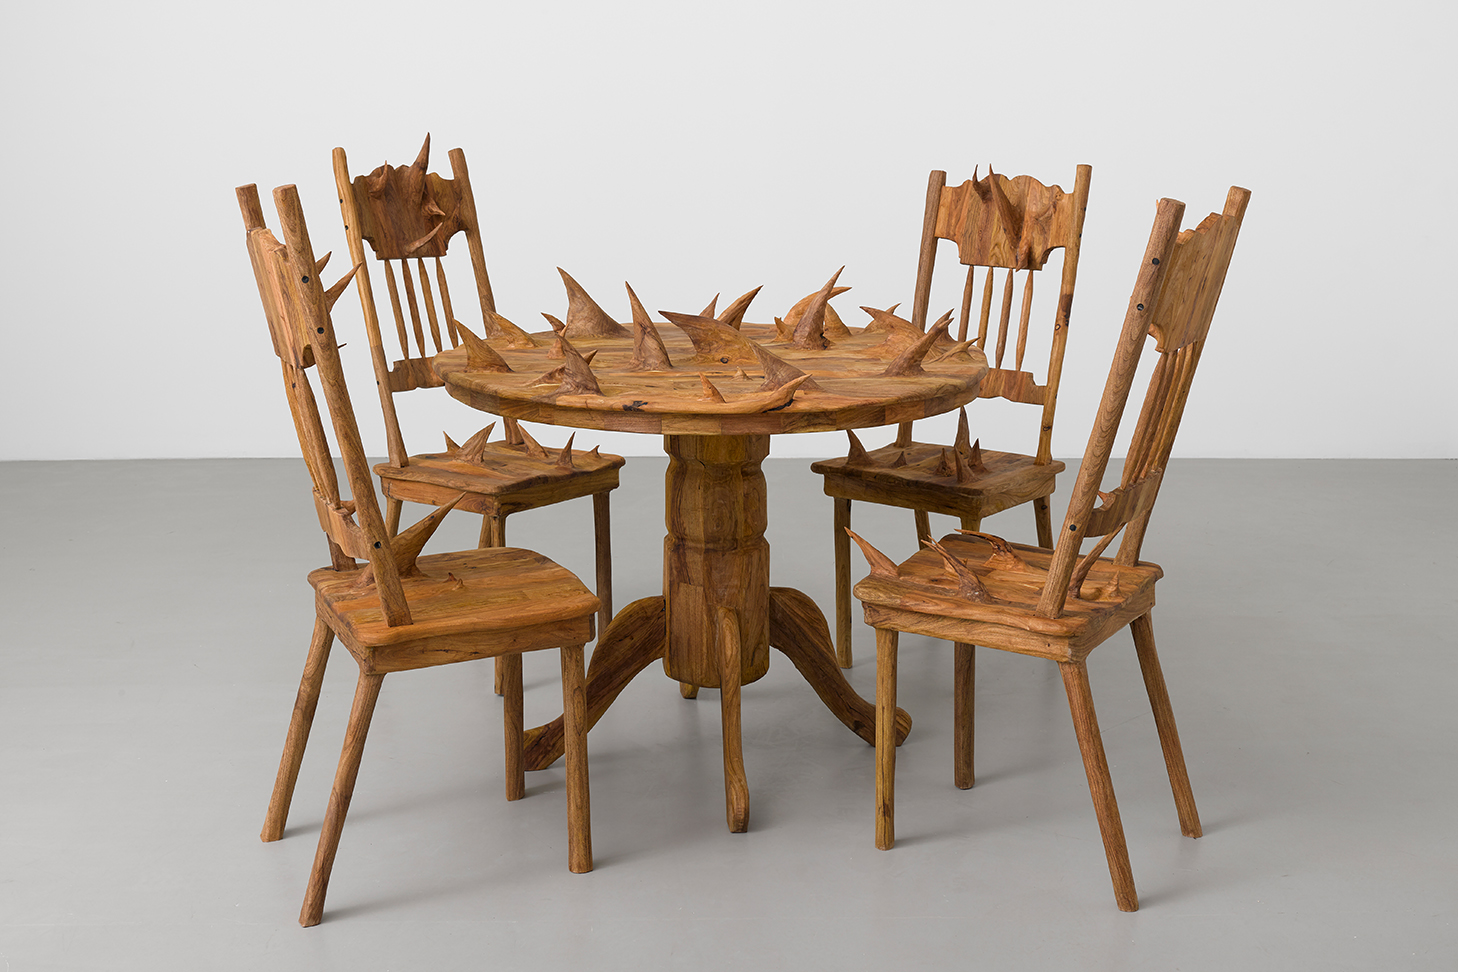 installation image of wood sculpture of four chairs and a circle dining table